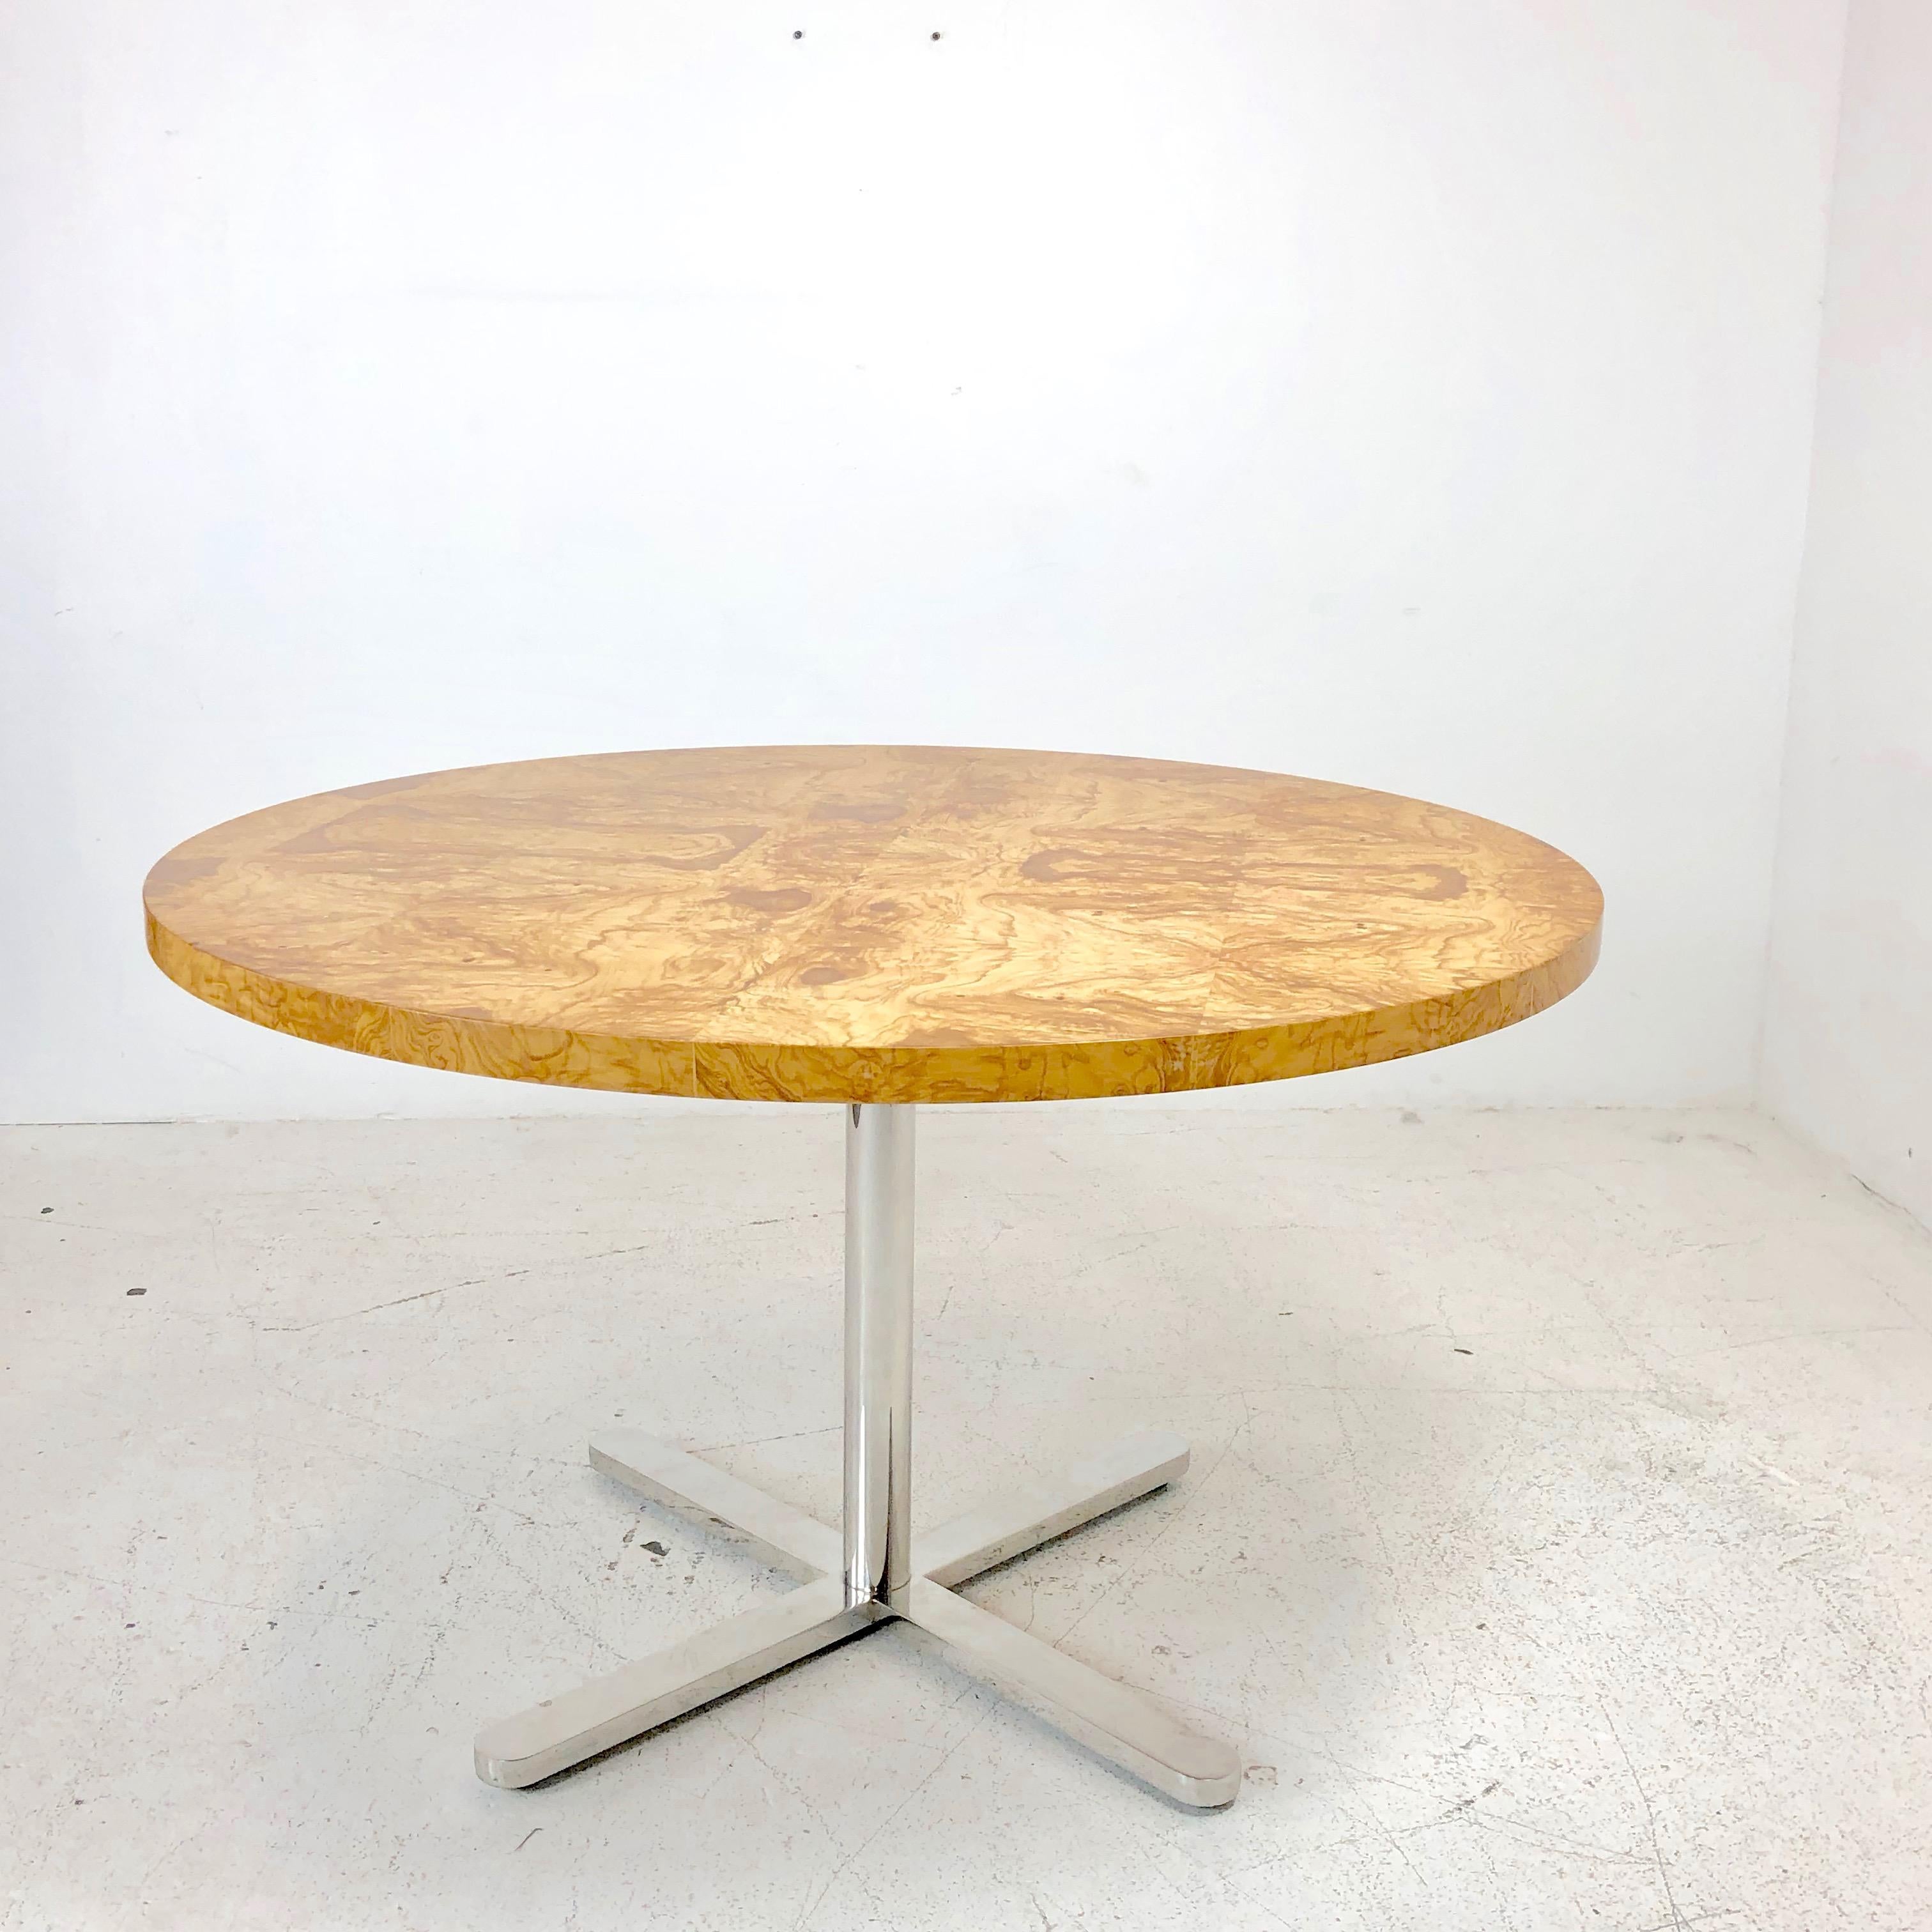 burl wood round dining table